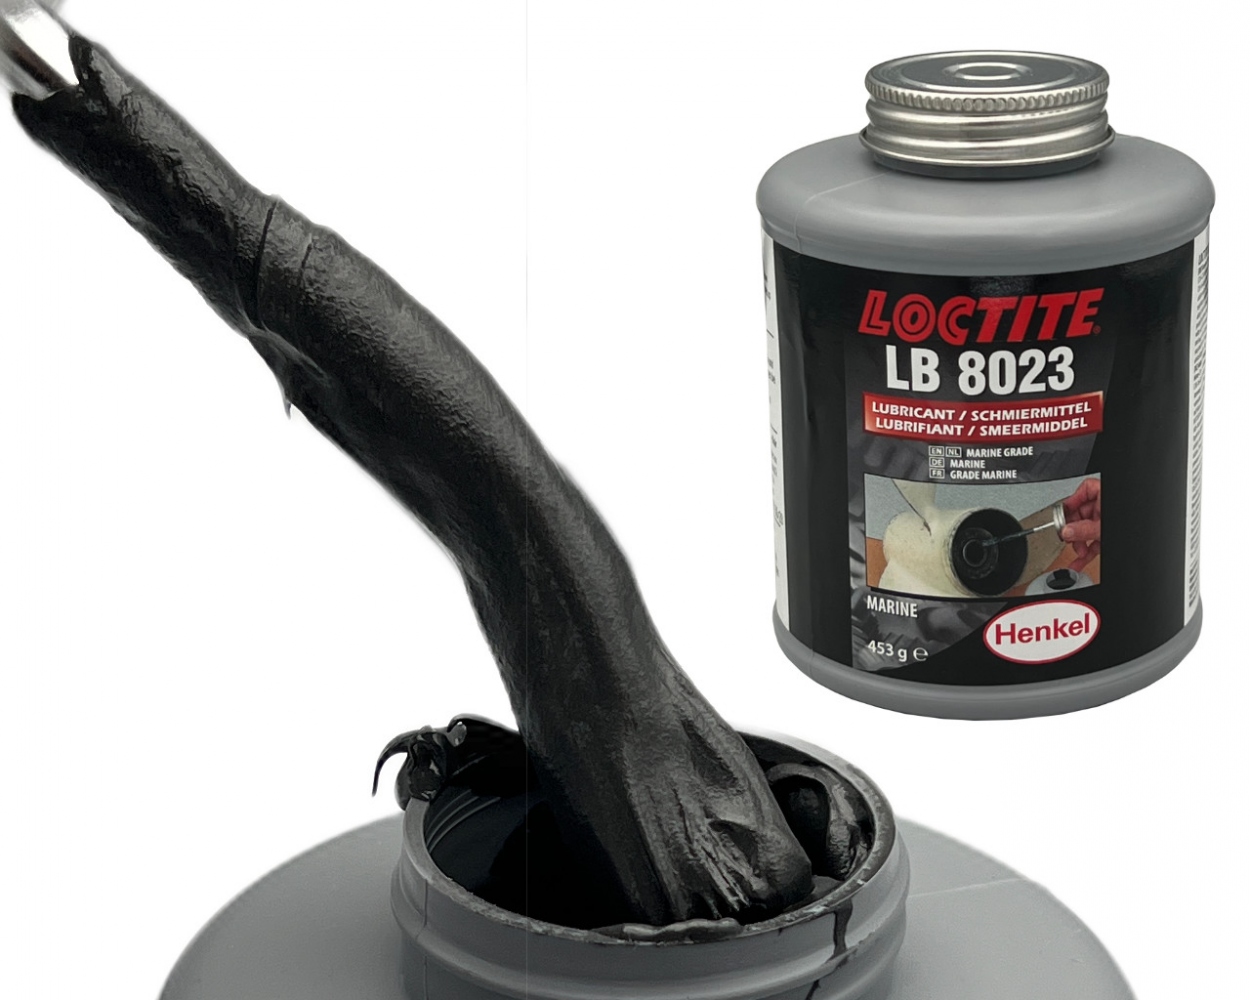 pics/Loctite/LB 8023/loctite-lb-8023anti-seize-paste-graphite-grease-high-water-resistanze-abs-certified-brush-can-454g-black-ol.jpg